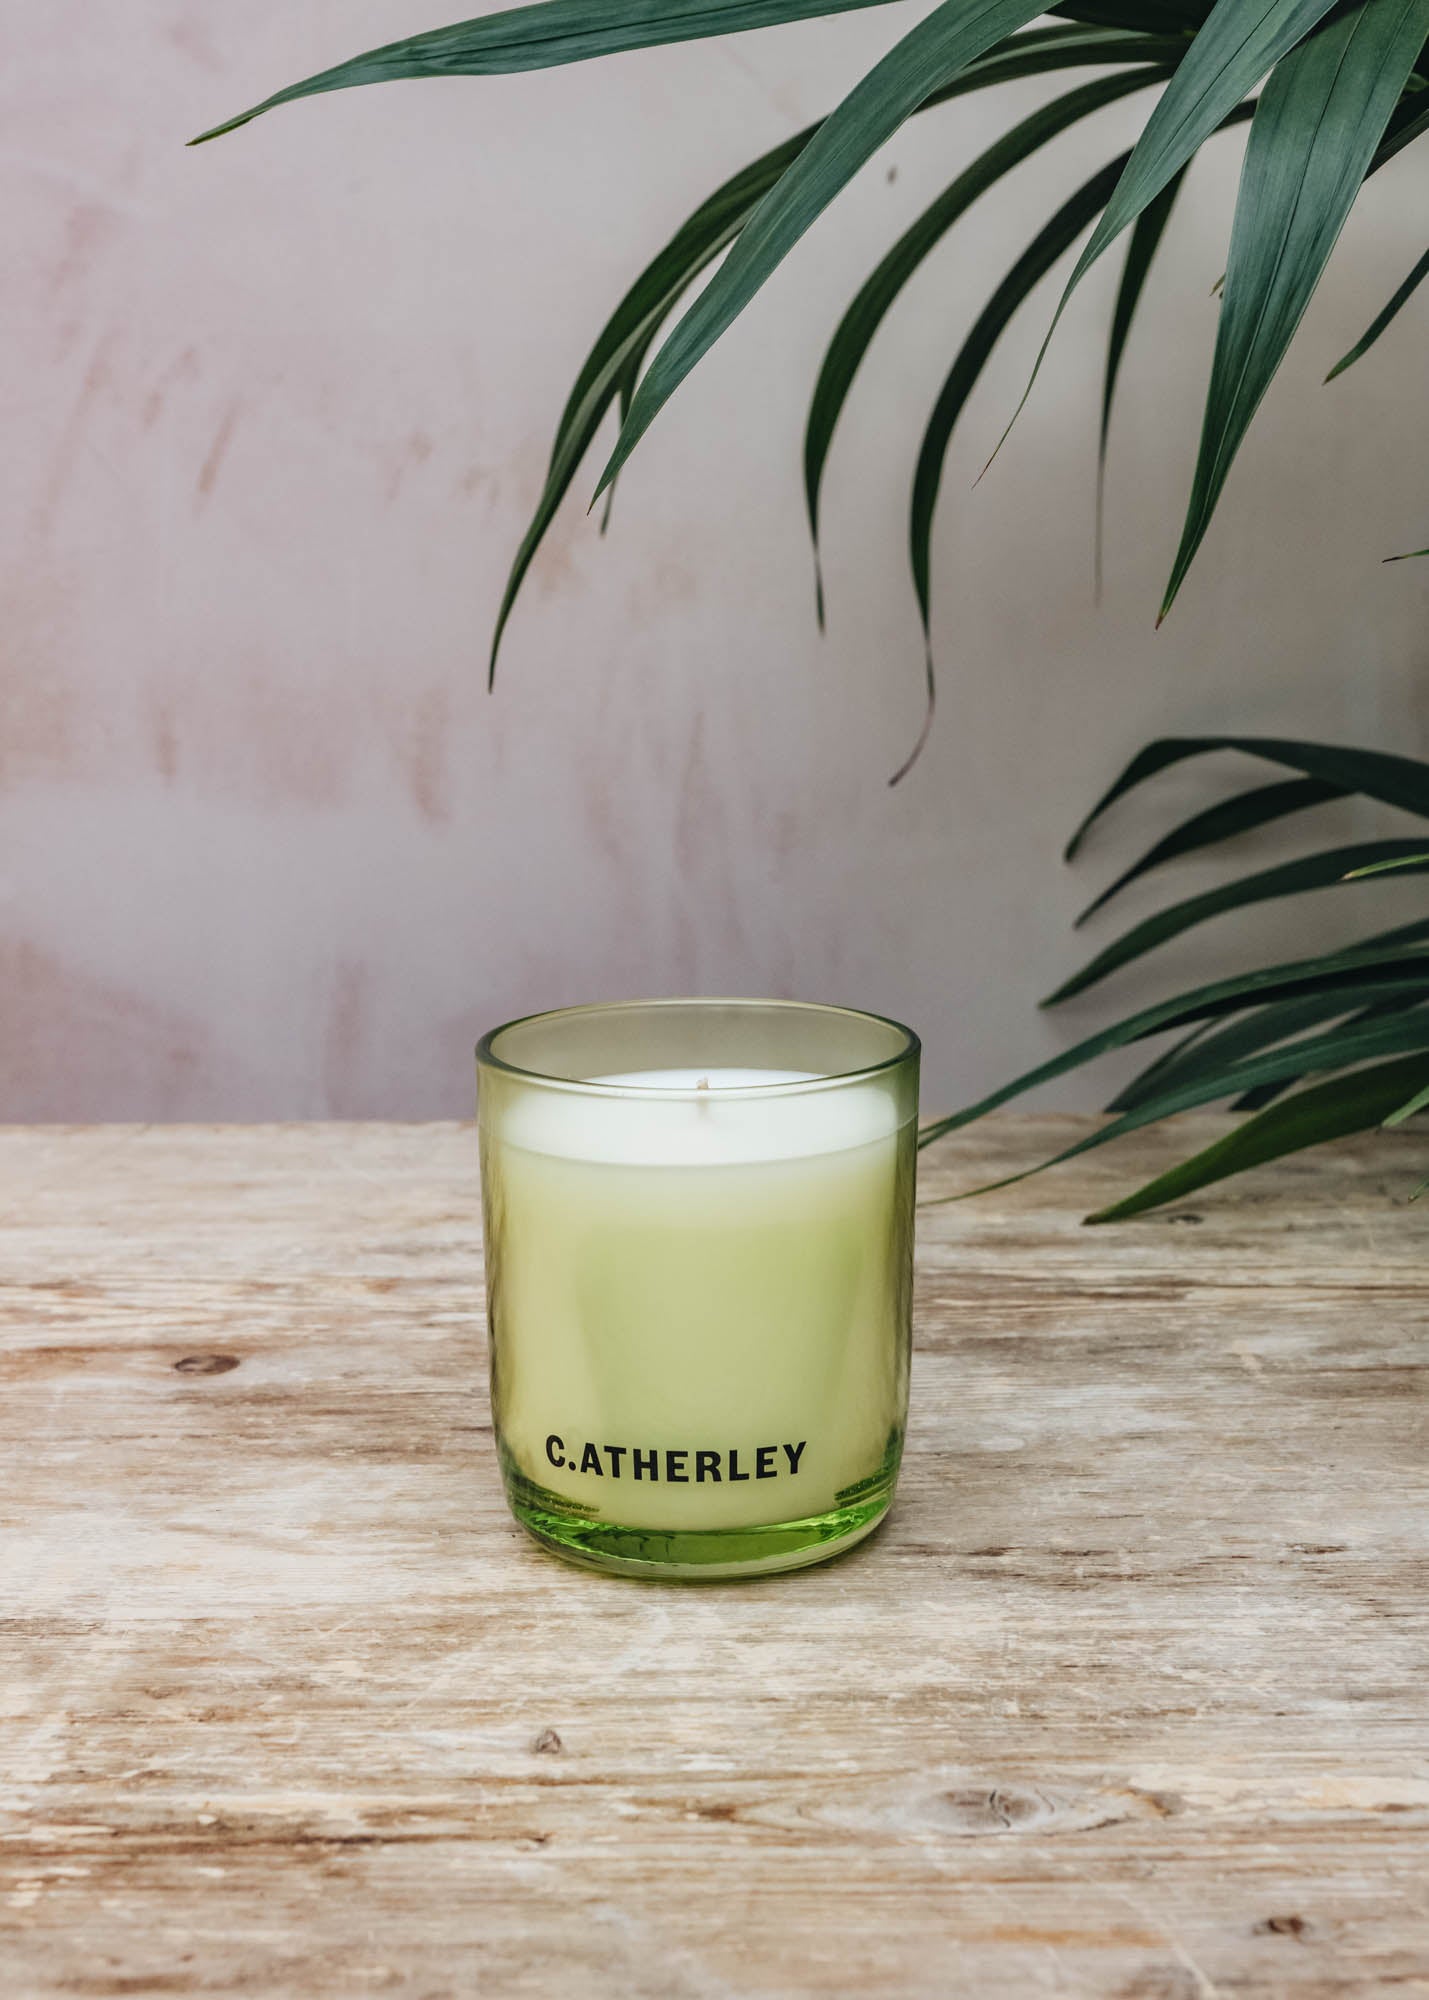 C.Atherley Geranium No.1 Scented Candle, 200g